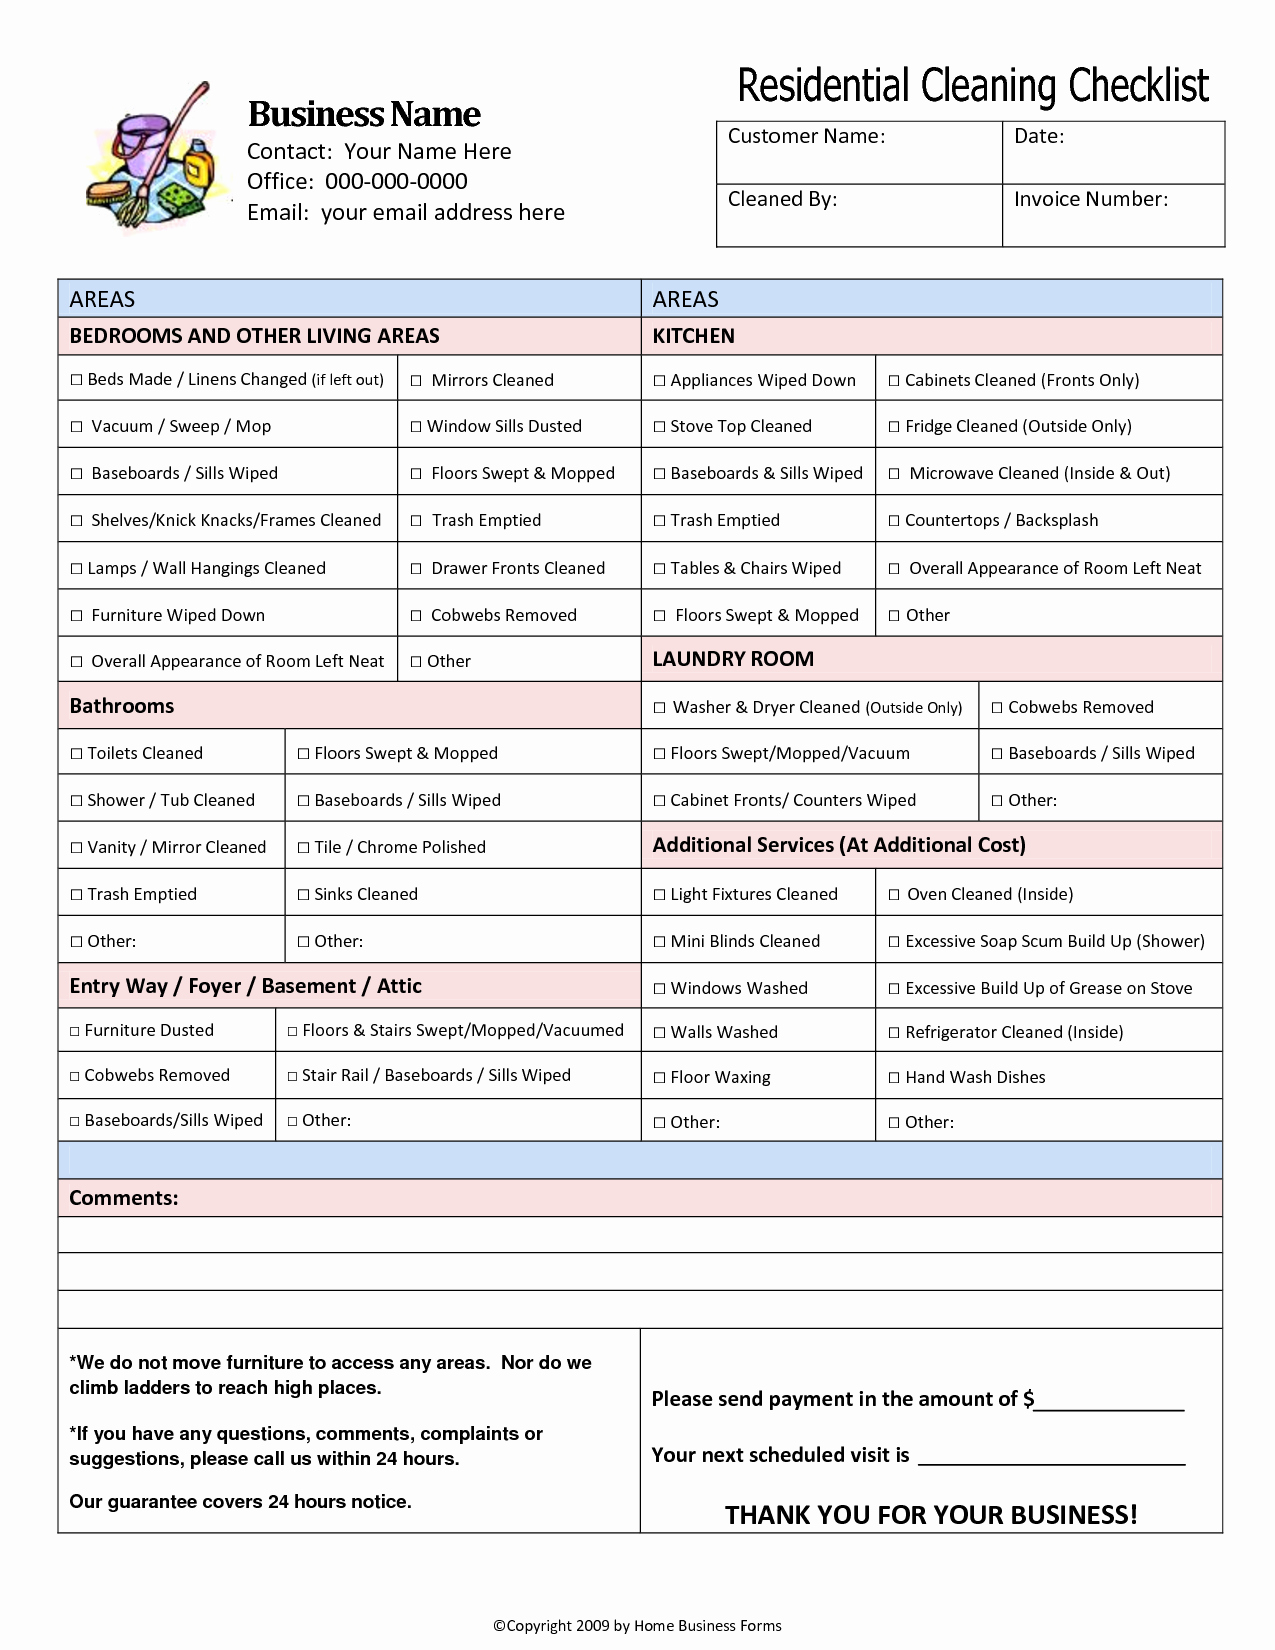 Cleaning Services Prices List Unique Residential House Cleaning Checklist Timesheets